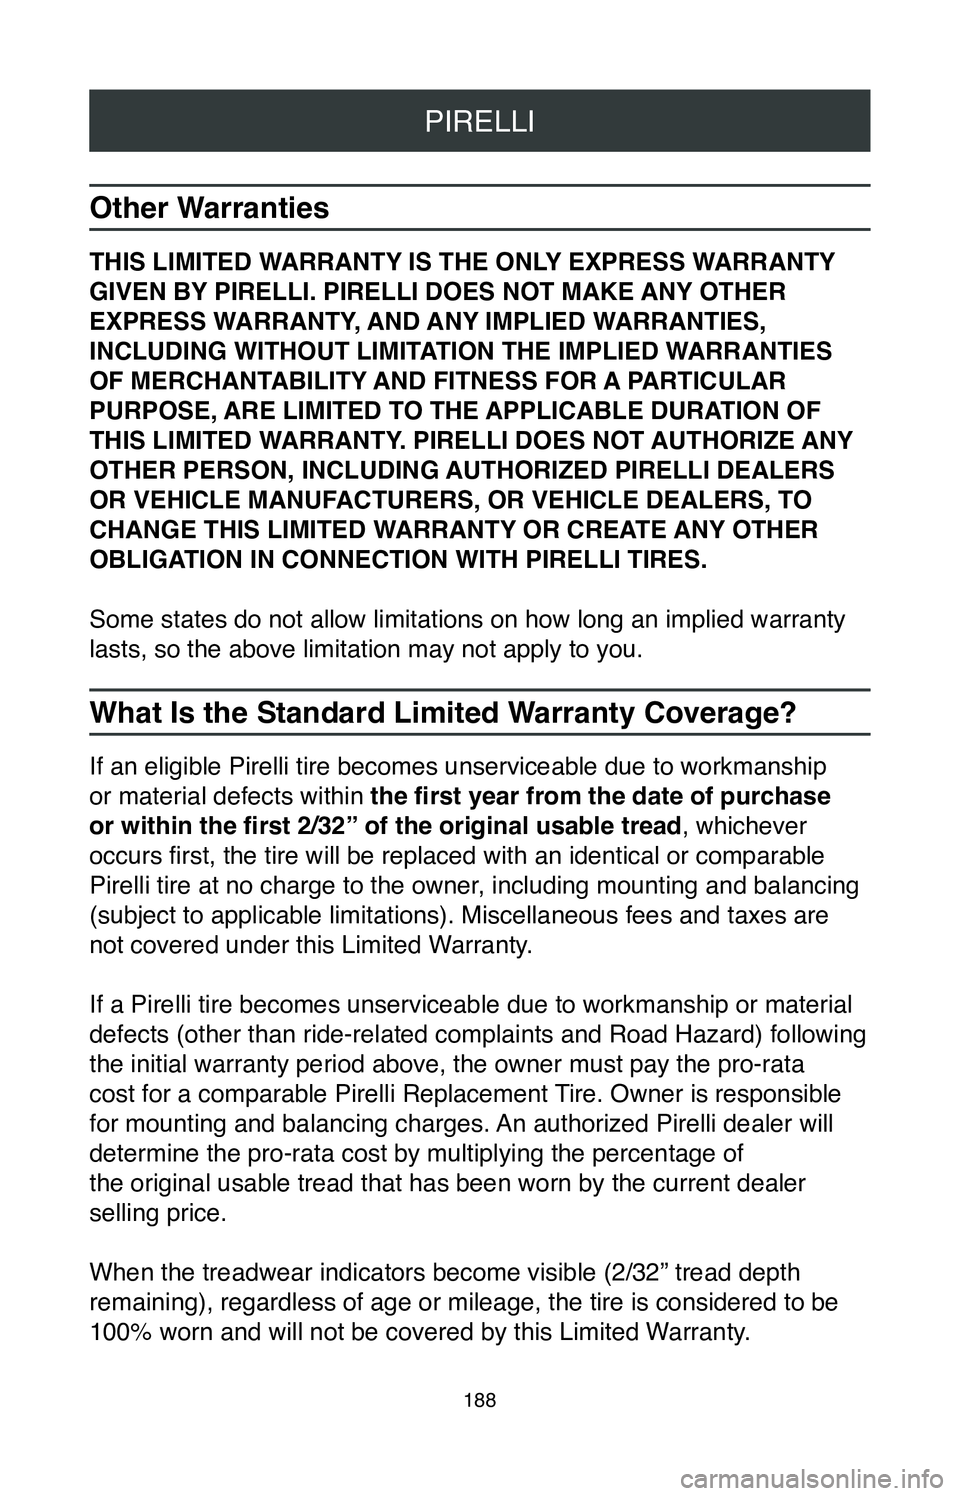 TOYOTA COROLLA 2020  Warranties & Maintenance Guides (in English) PIRELLI
188
Other Warranties
THIS LIMITED WARRANTY IS THE ONLY EXPRESS WARRANTY 
GIVEN BY PIRELLI. PIRELLI DOES NOT MAKE ANY OTHER 
EXPRESS WARRANTY, AND ANY IMPLIED WARRANTIES, 
INCLUDING WITHOUT LIM